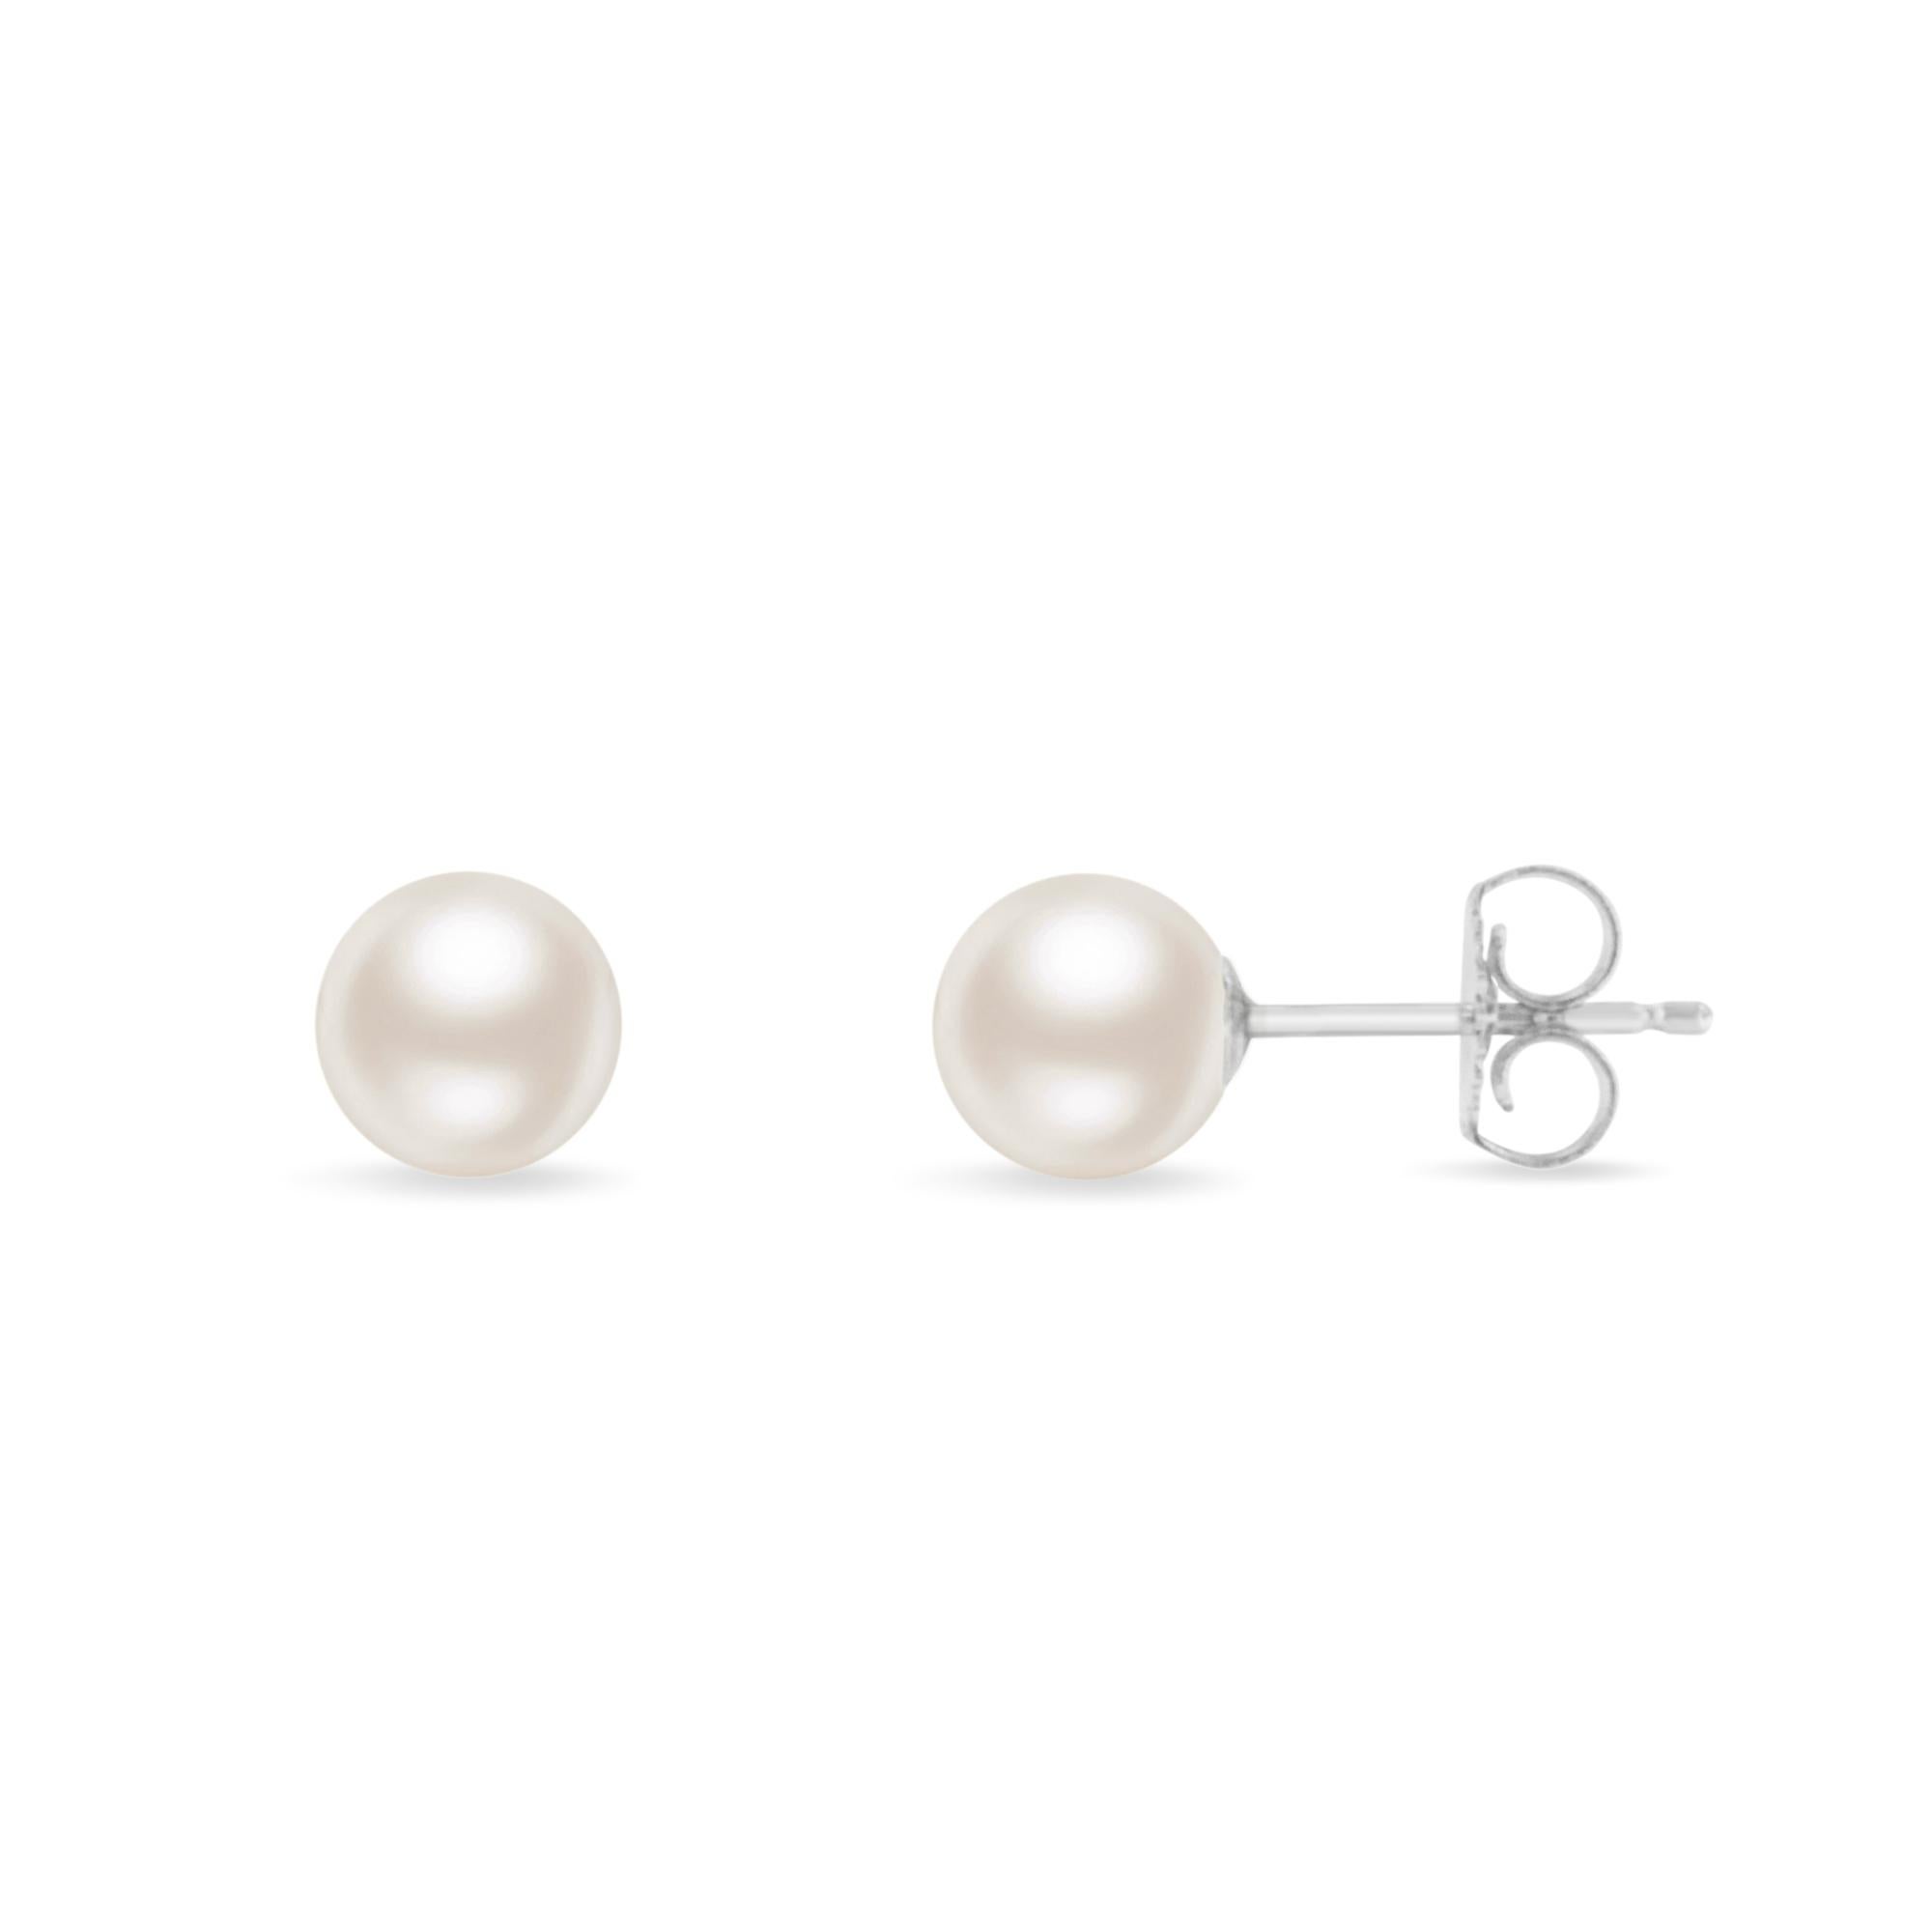 Sweet, sophisticated and seemingly simple, our stunning Akoya Pearls are totally enchanting, with an ever-vibrant luminosity dancing across their radiant surfaces. These 5.5-6MM, cultured white with pink overtone Akoya Pearls are of the highest